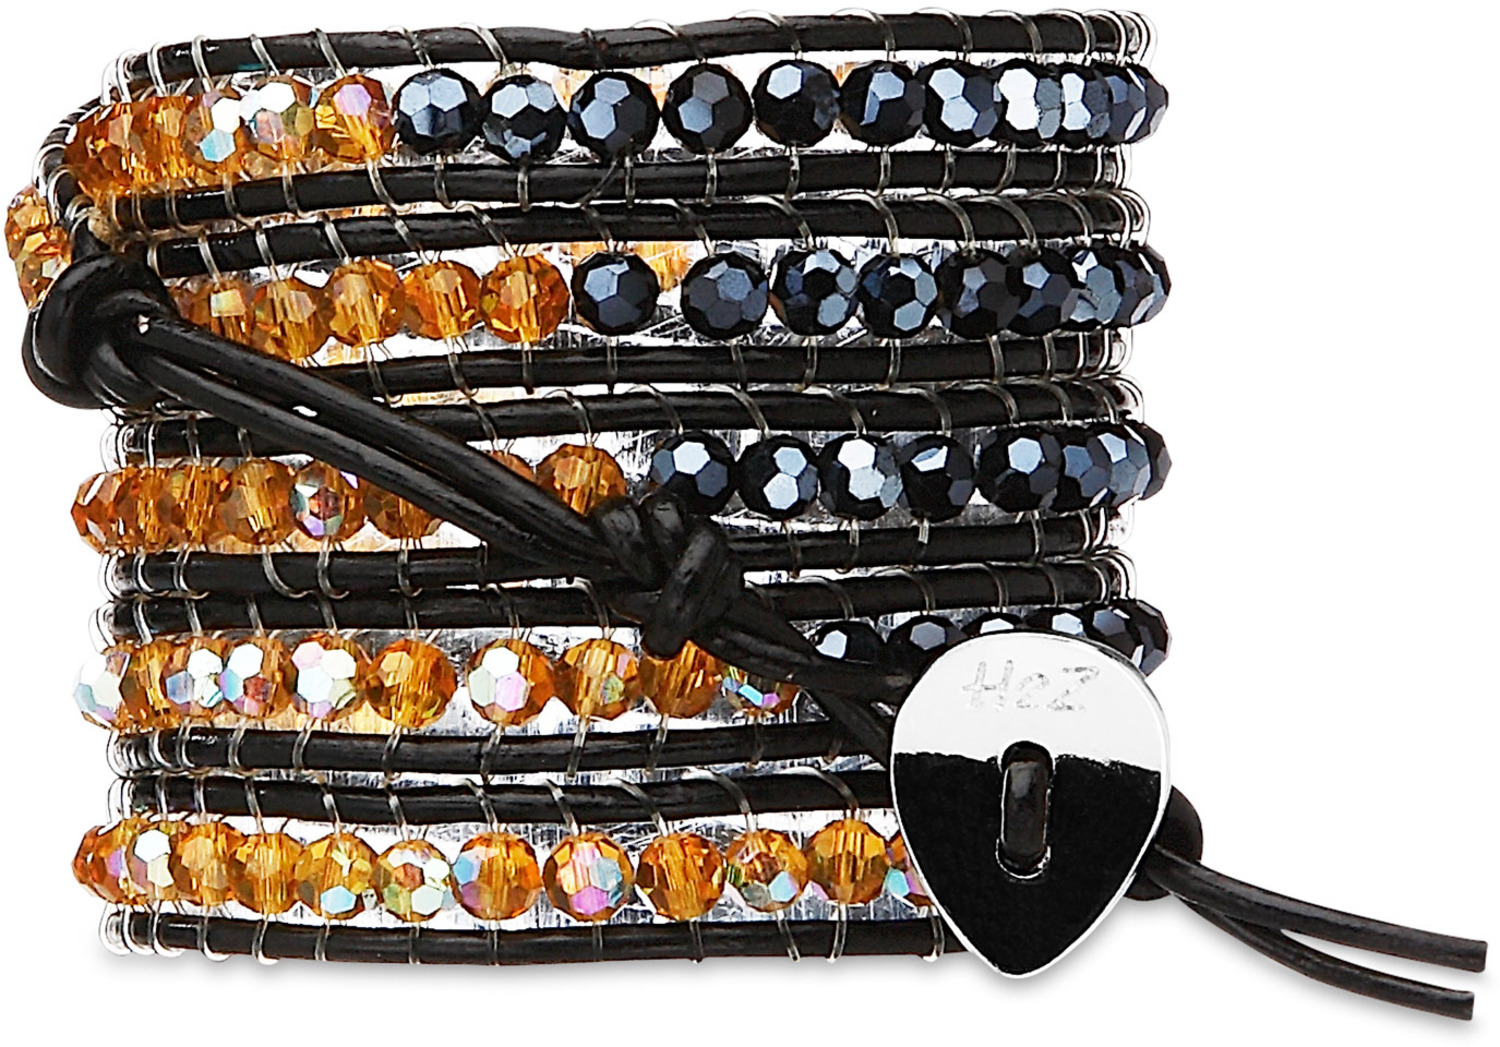 Midnight Amber- Herm & Amber by H2Z - Wrap Bracelets - Midnight Amber- Herm & Amber - 35 inch Iridescent Hematite and Amber Crystal Beads w/ Black Leather Wrap Bracelet
